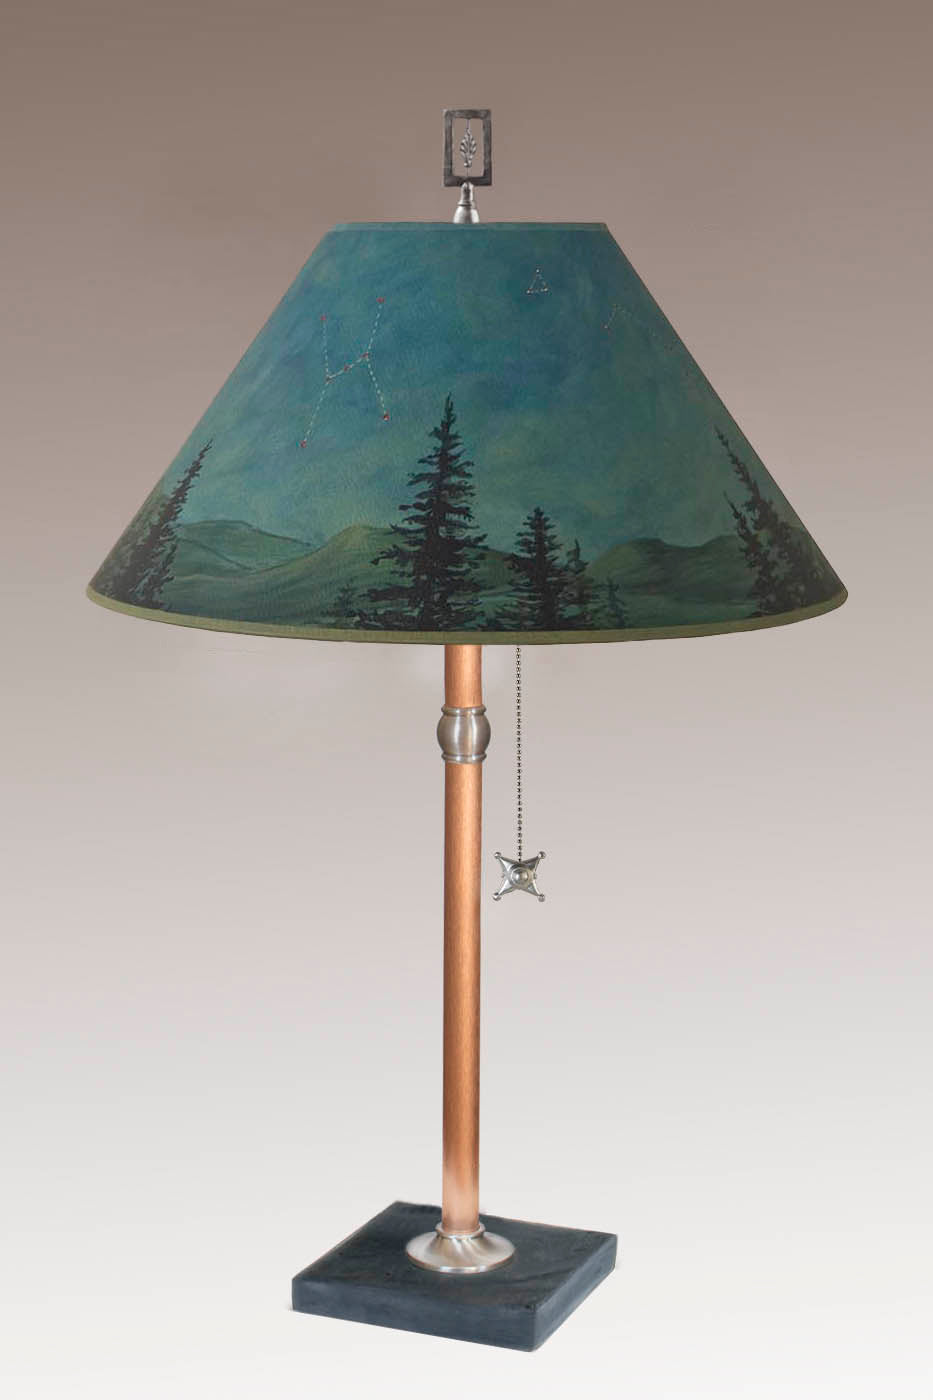 Janna Ugone & Co Table Lamp Copper Table Lamp with Large Conical Shade in Midnight Sky